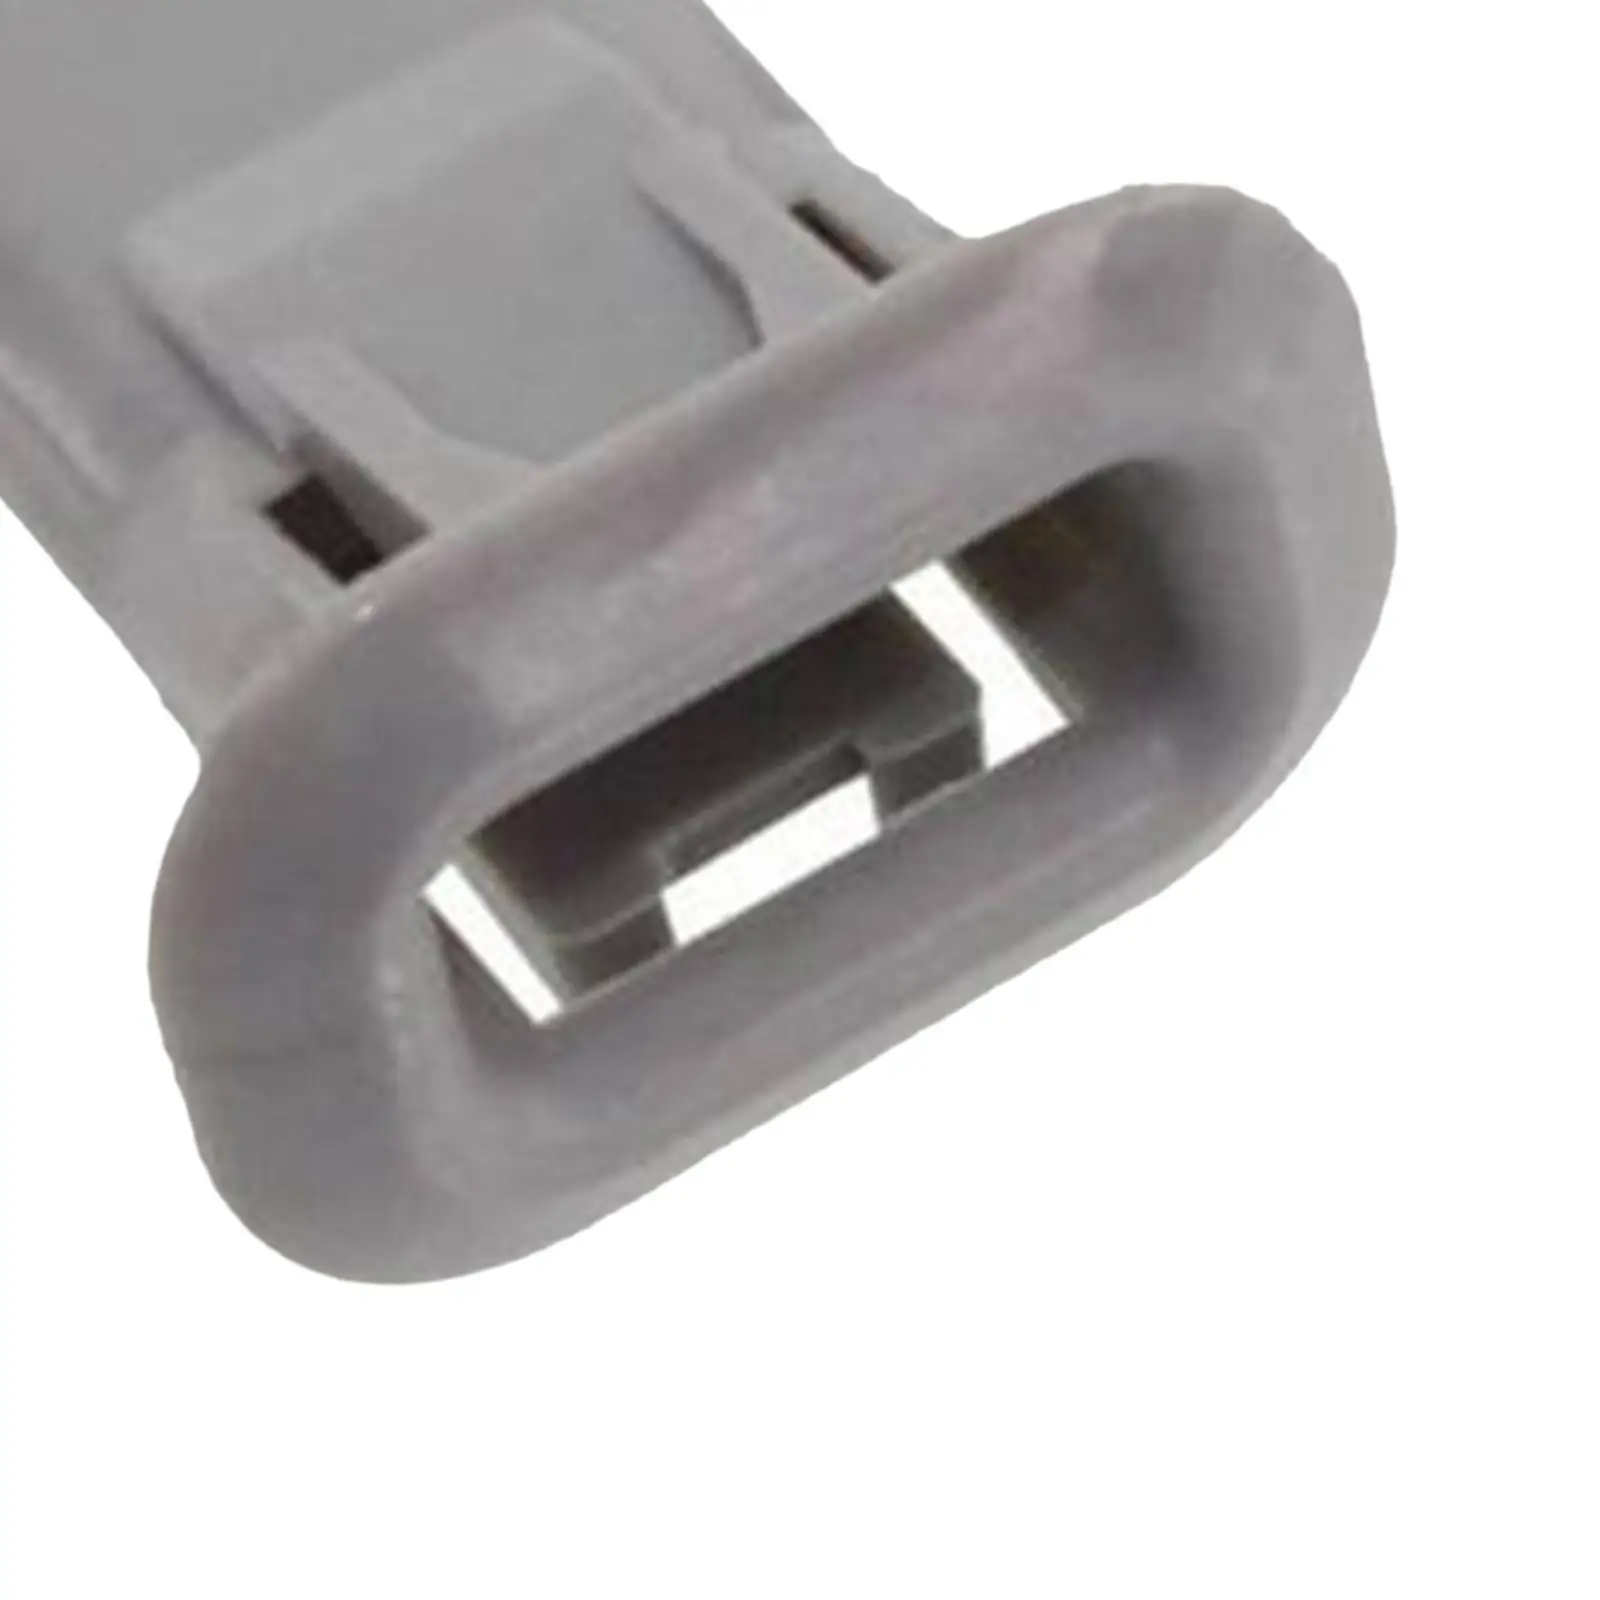 Rear Seat Seat Cushion Pad Bracket Spare Parts Direct Replaces Fastener Clip for Mercedes-Benz A180 200 300 Easy to Install